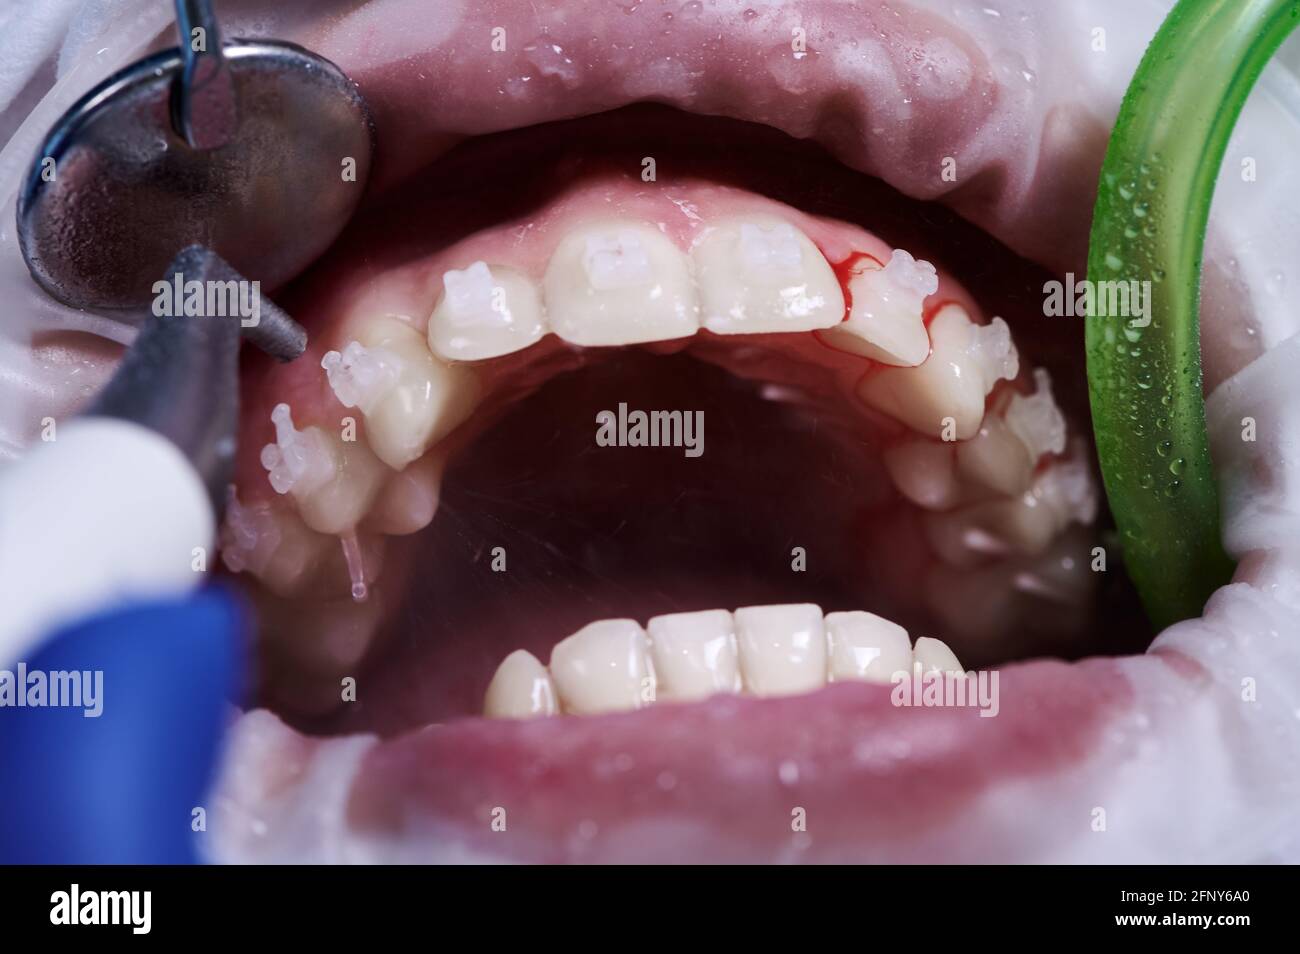 Close up of periodontist using dental tools while cleaning teeth of patient, with cheek retractor in mouth and brackets on teeth receiving dental treatment. Concept of professional dental hygiene Stock Photo